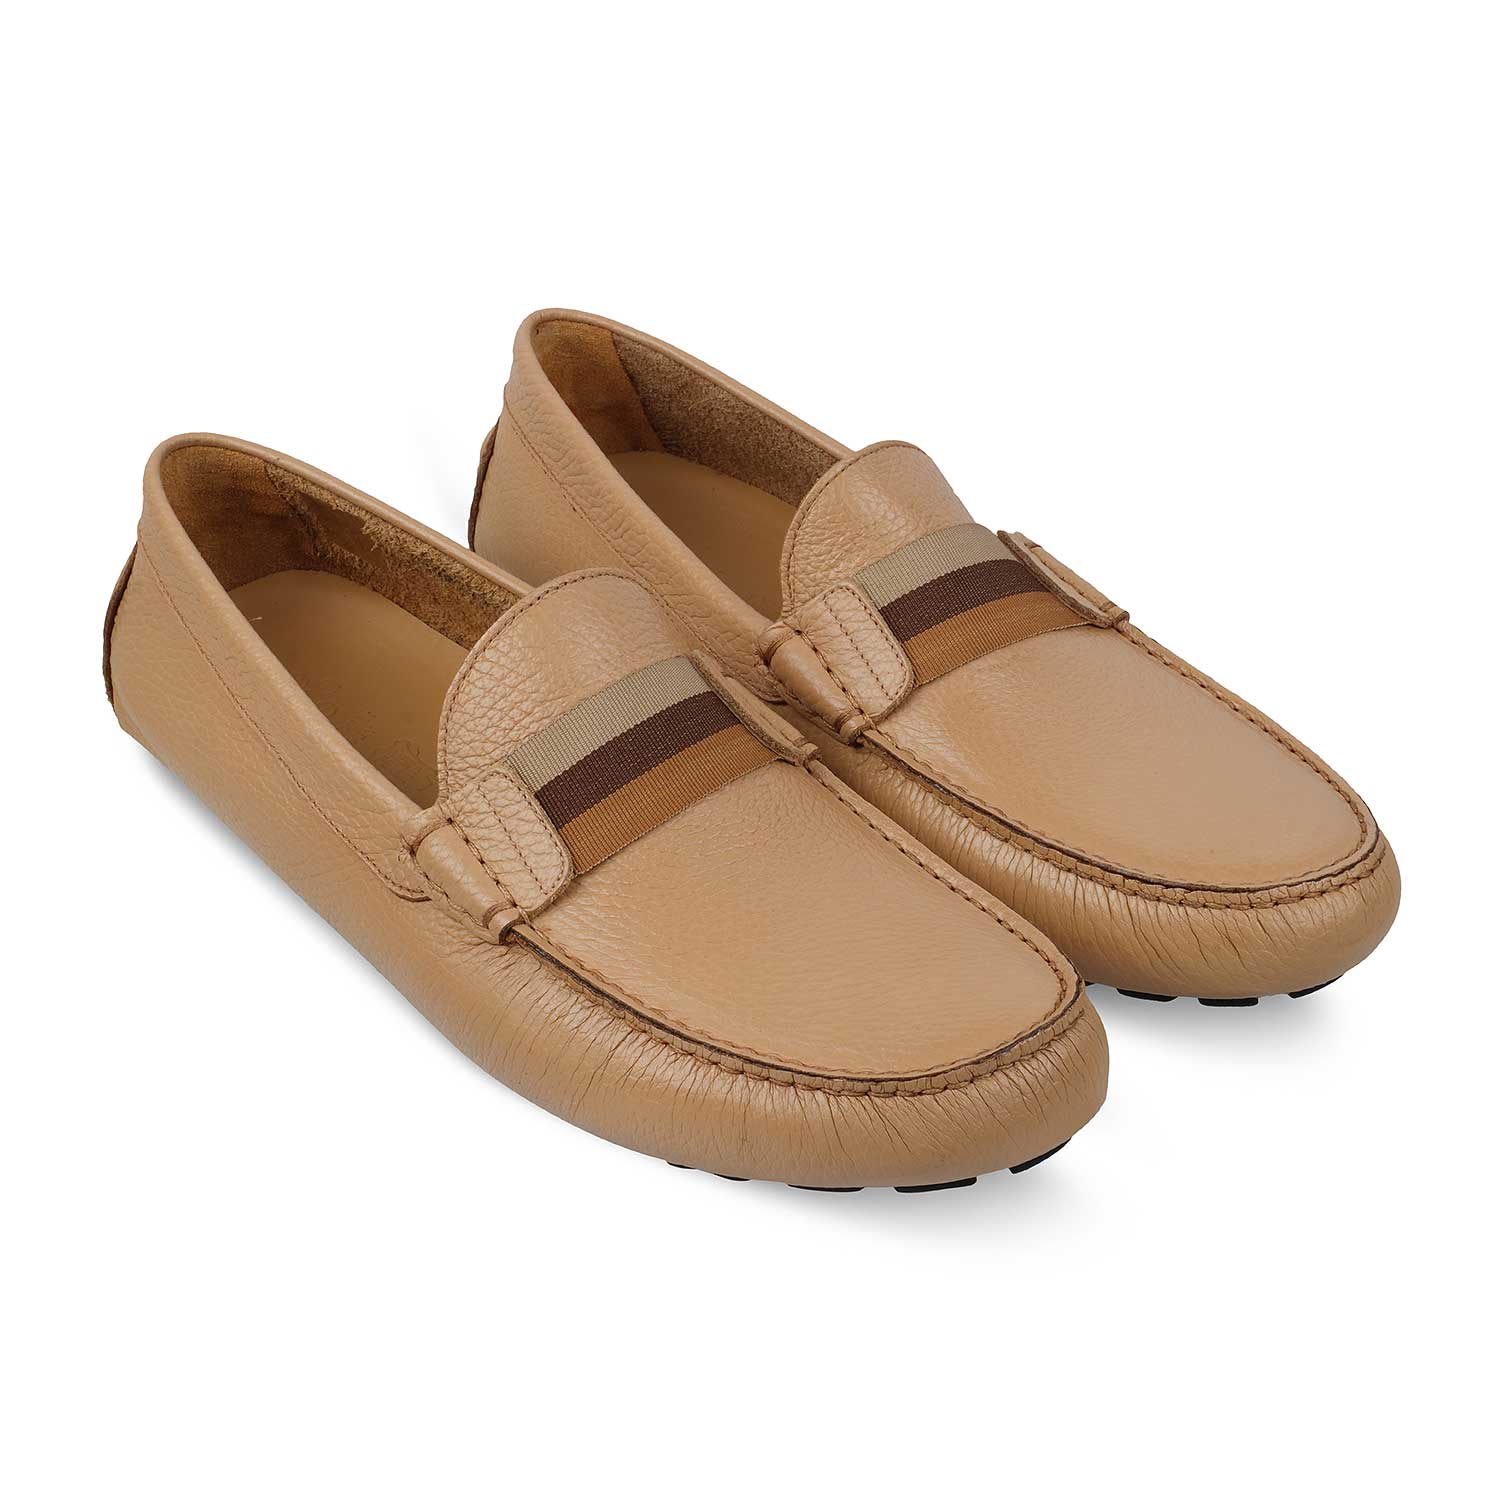 The Macario Beige Men's Handcrafted Leather Driving Loafers Tresmode